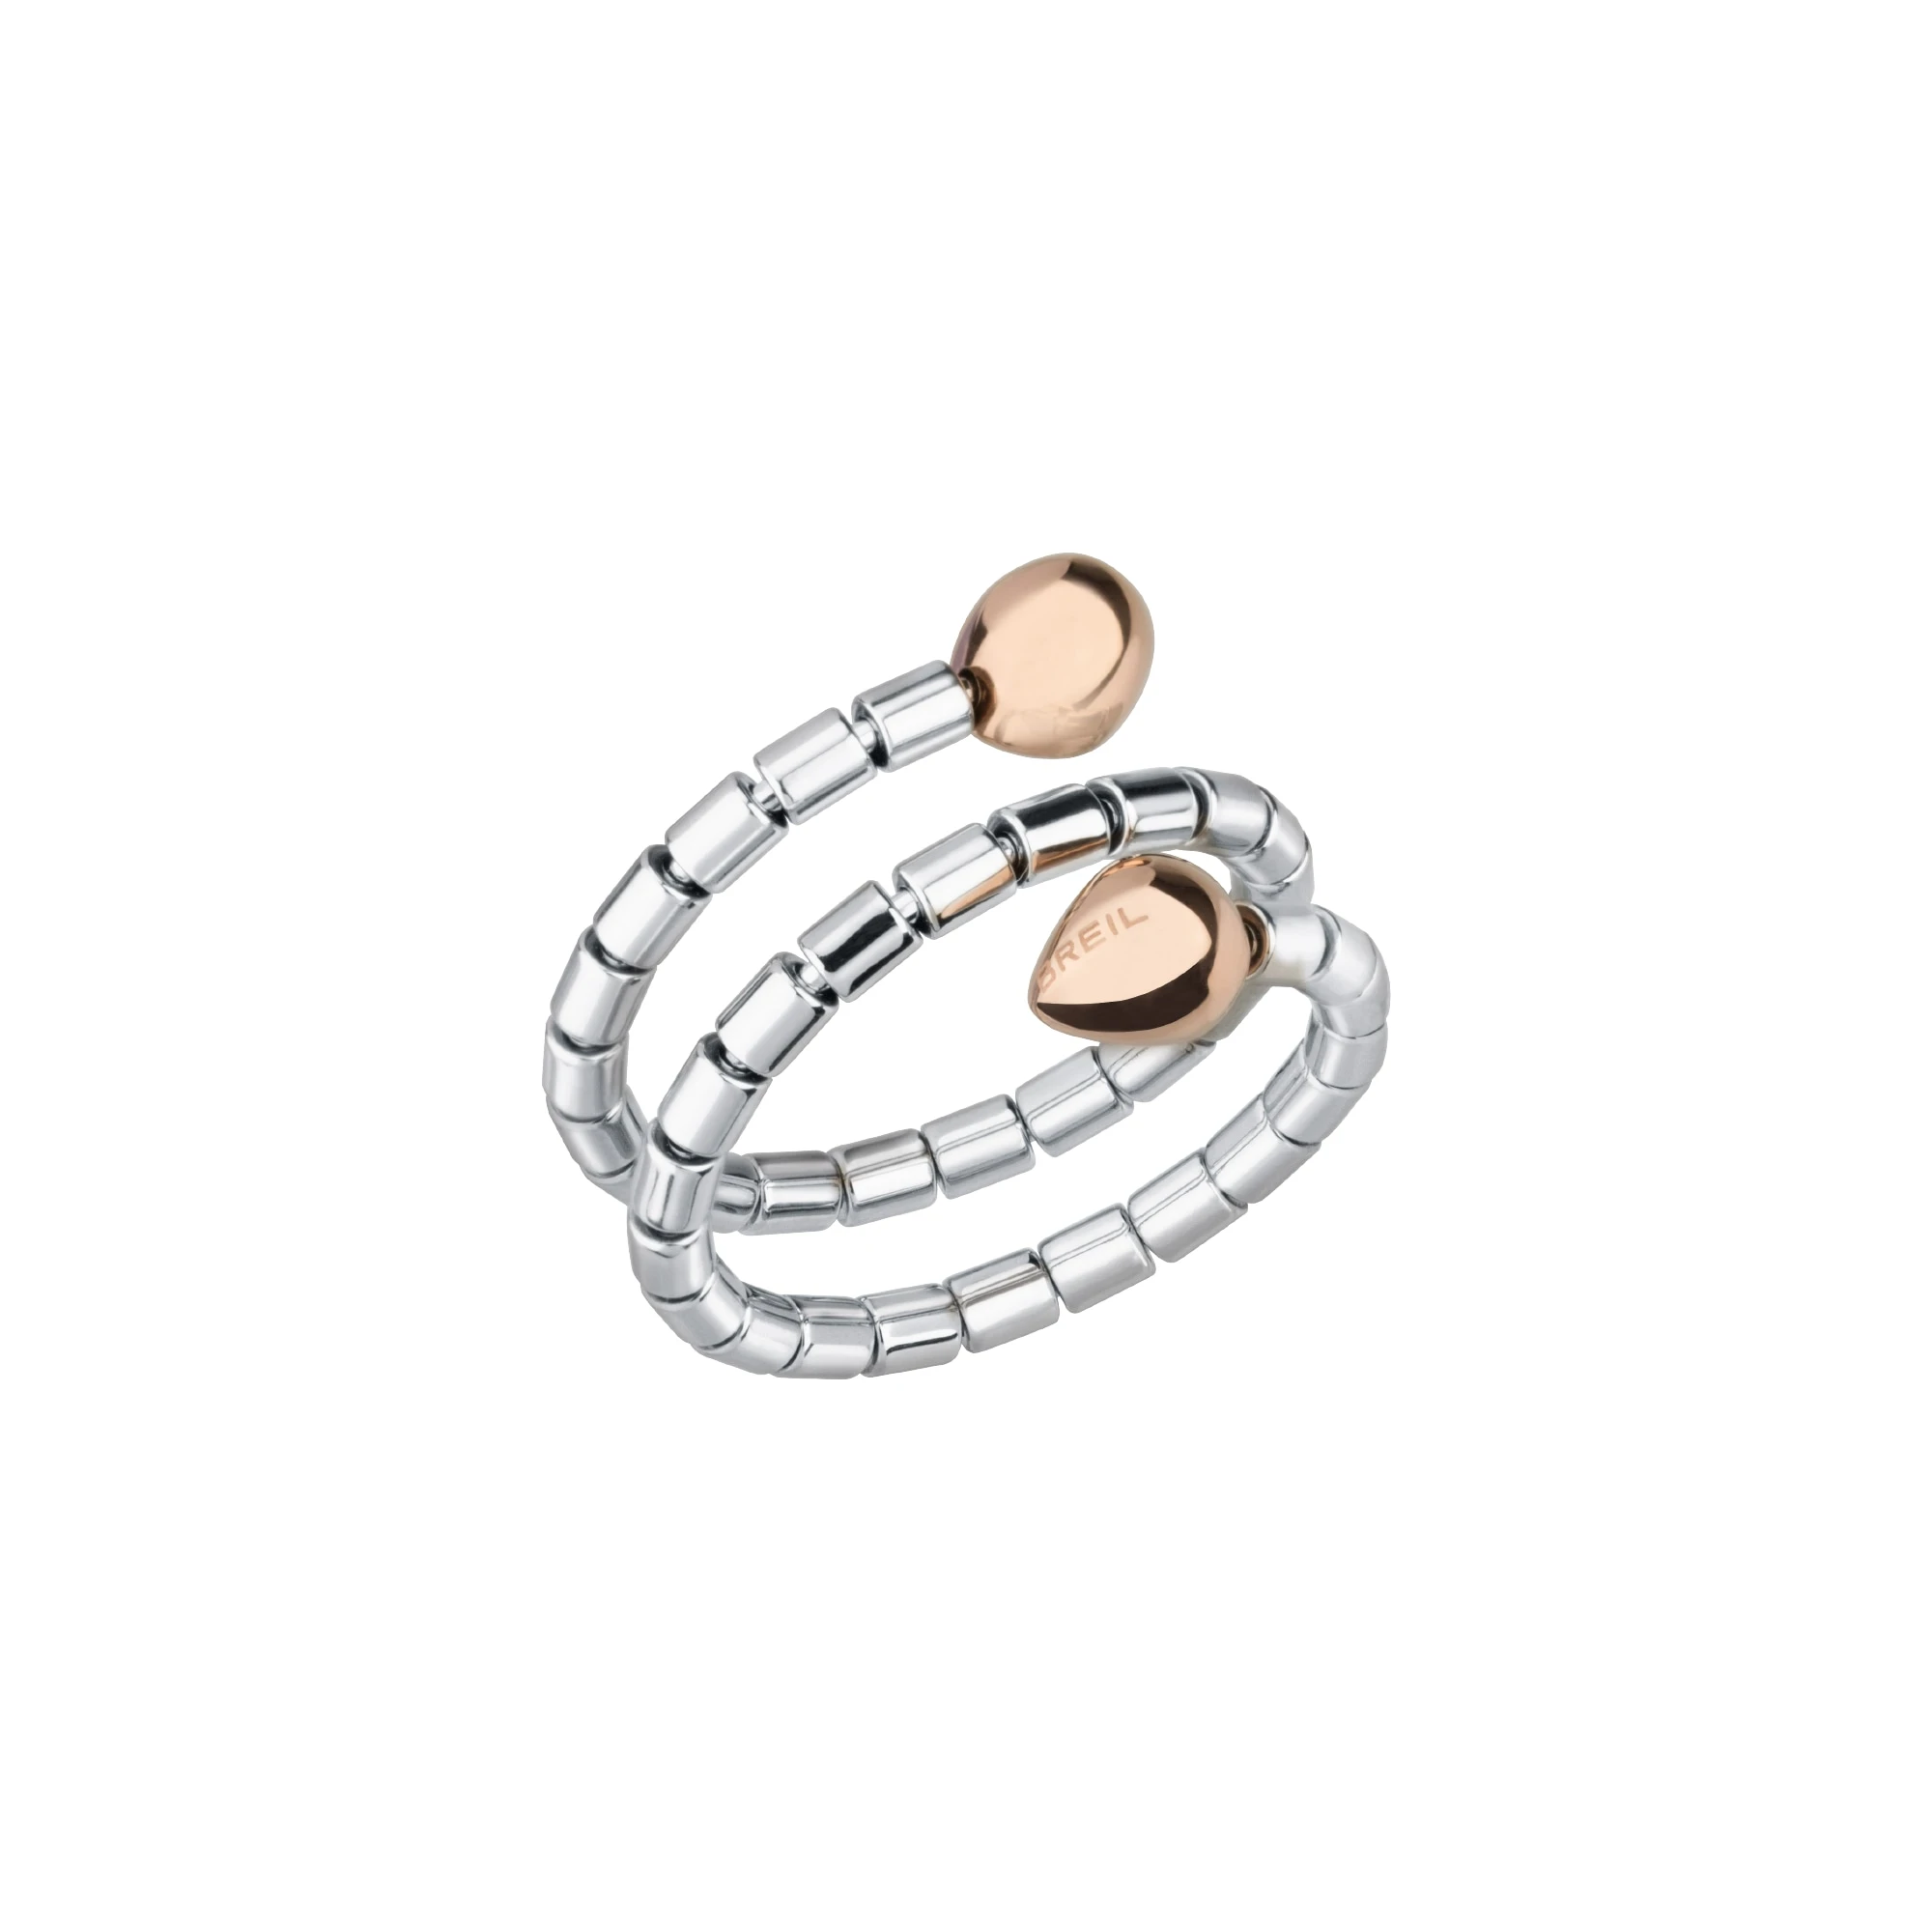 ROYAL - OPEN ENDED RING WITH IP ROSE GOLD ELEMENT - 1 - TJ1848_ | Breil